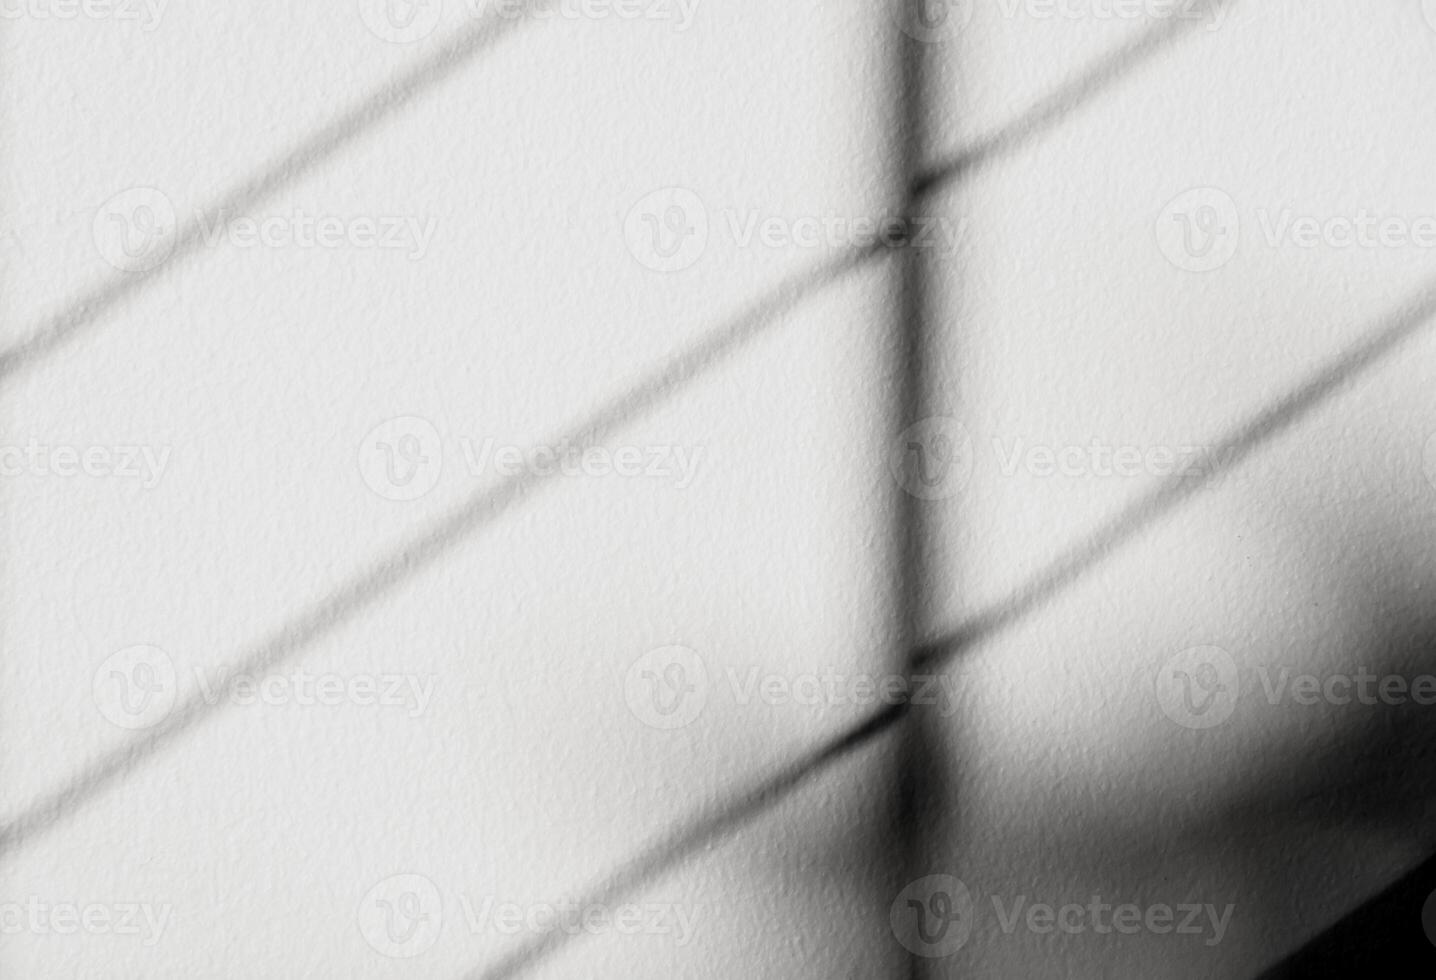 Grey background with bright light of Window frame Shadow on concrete wall surface texture,Empty White Cement Studio room with Sunlight reflect on plaster paint,Backdrop for Product Design Present photo